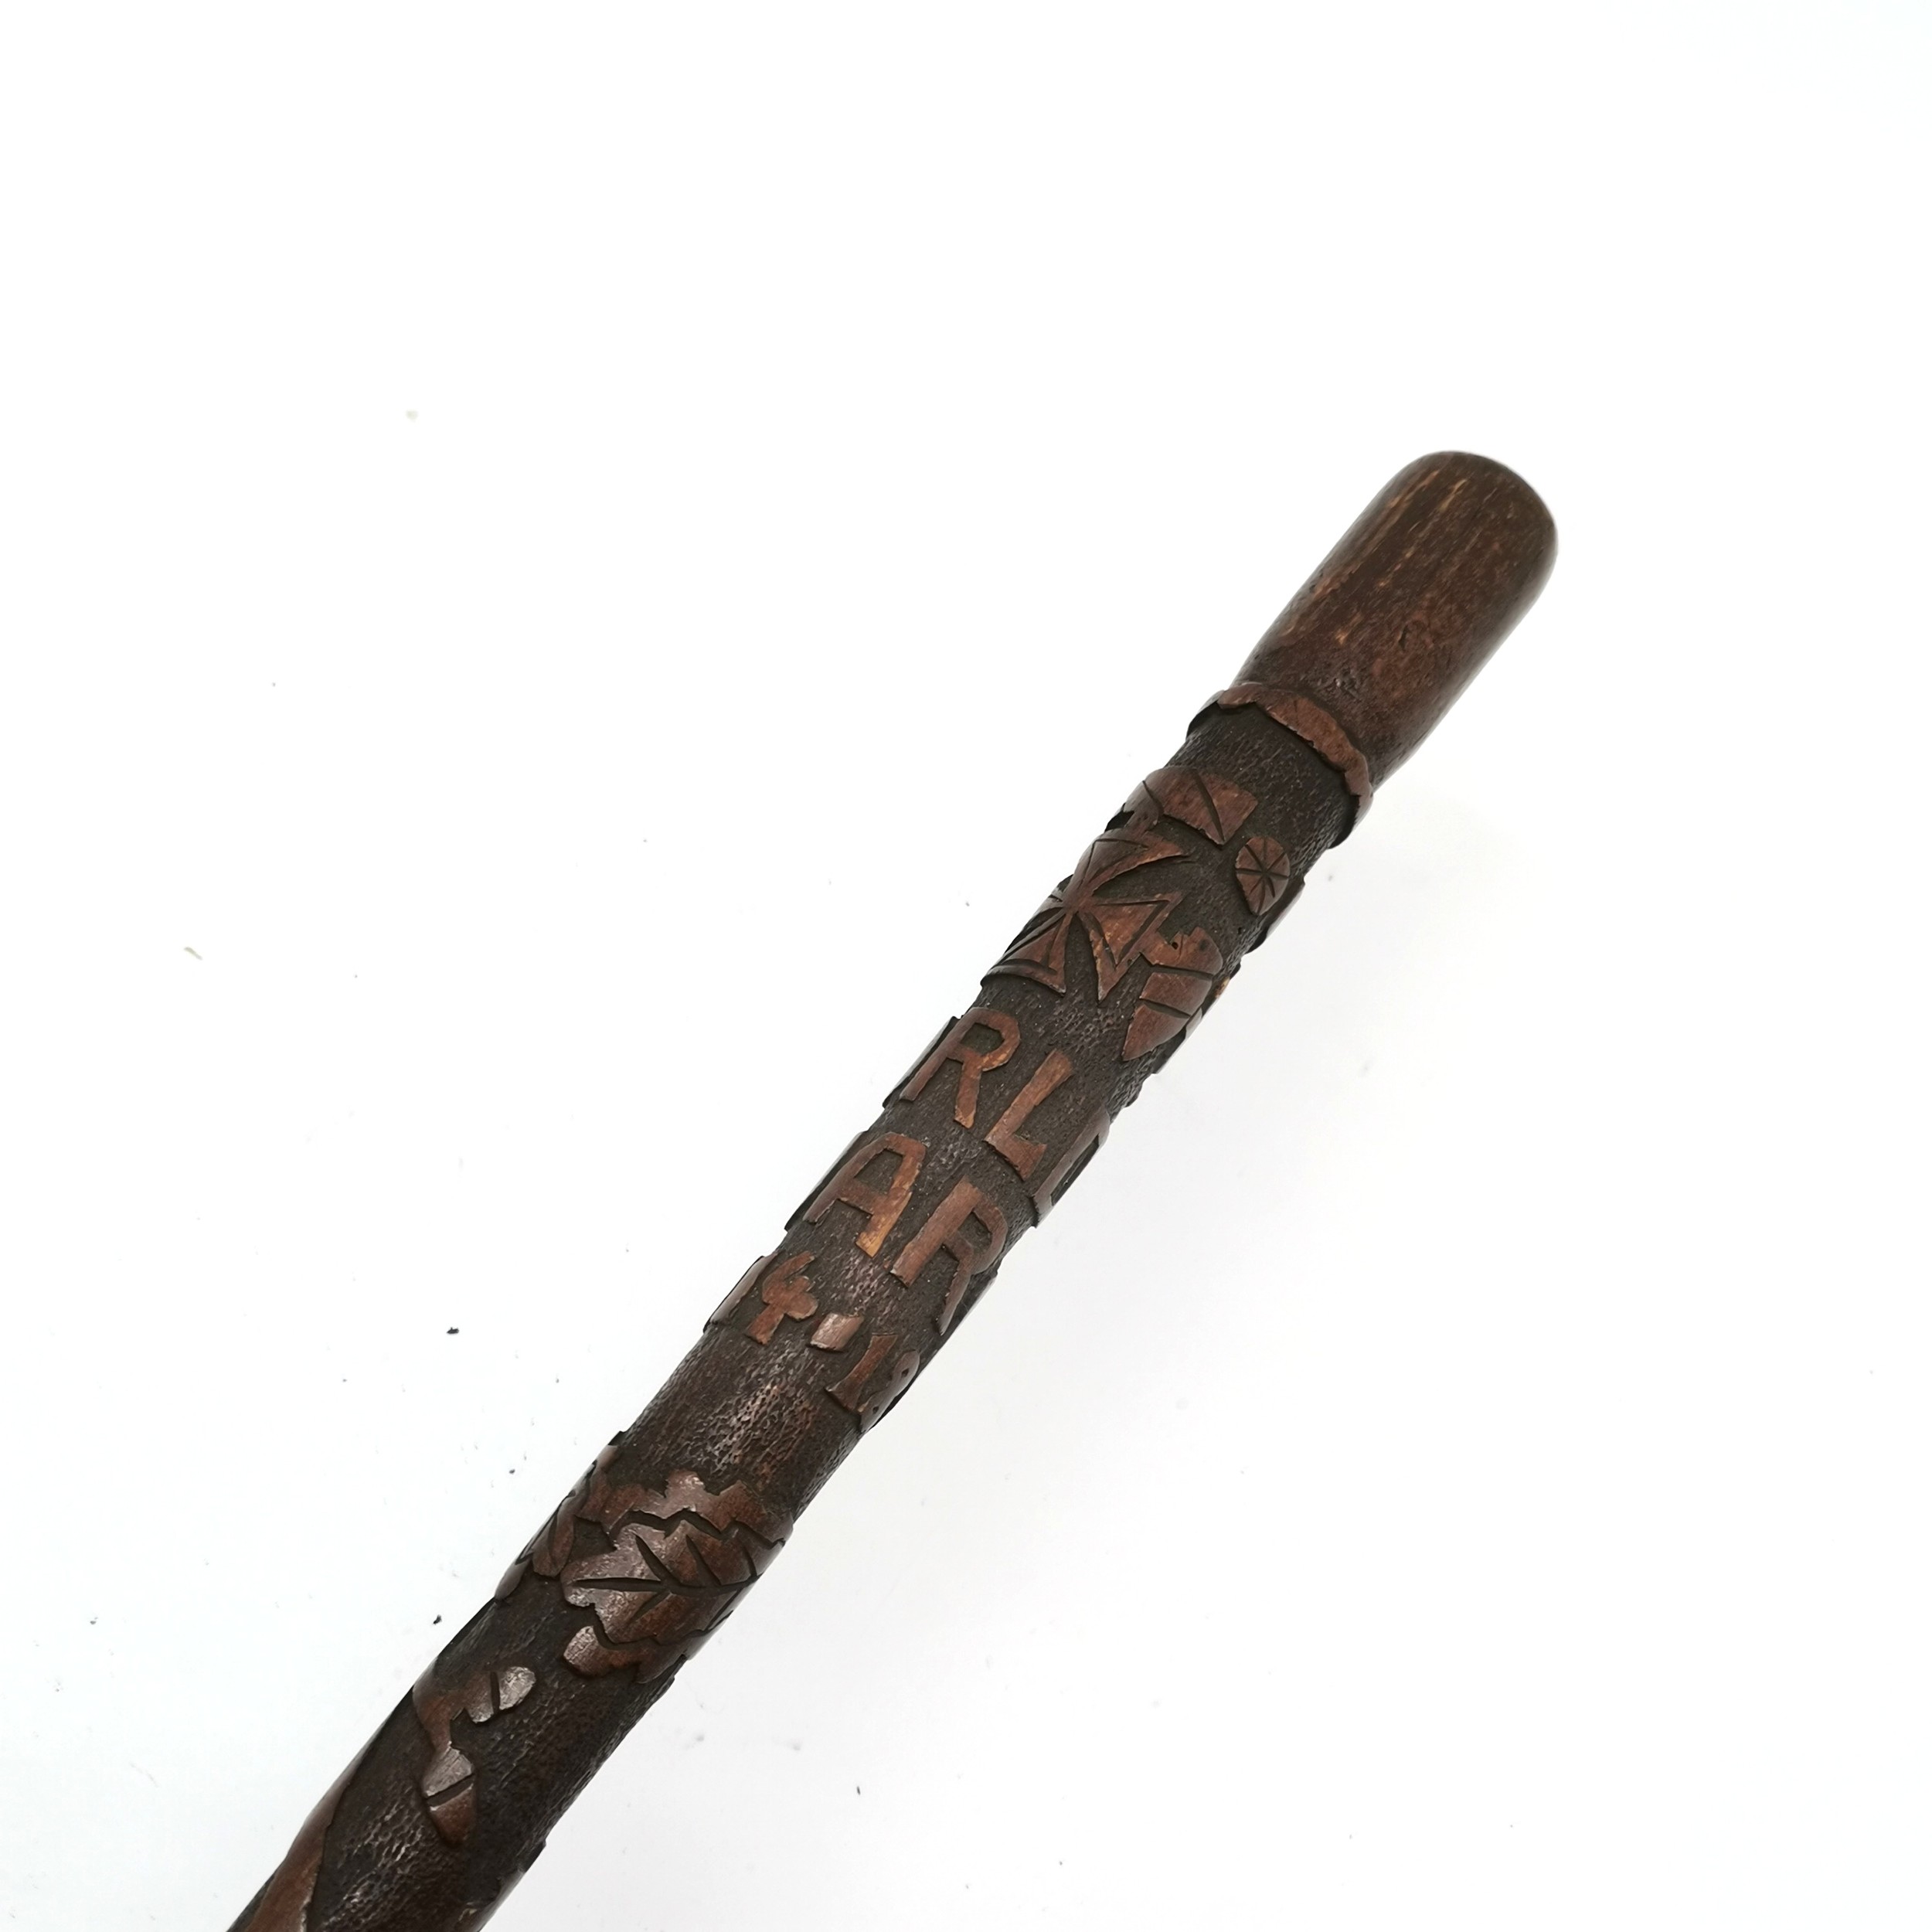 1914/18 hand carved walking stick with iron cross and oak leaf detail - 84cm long - no obvious signs